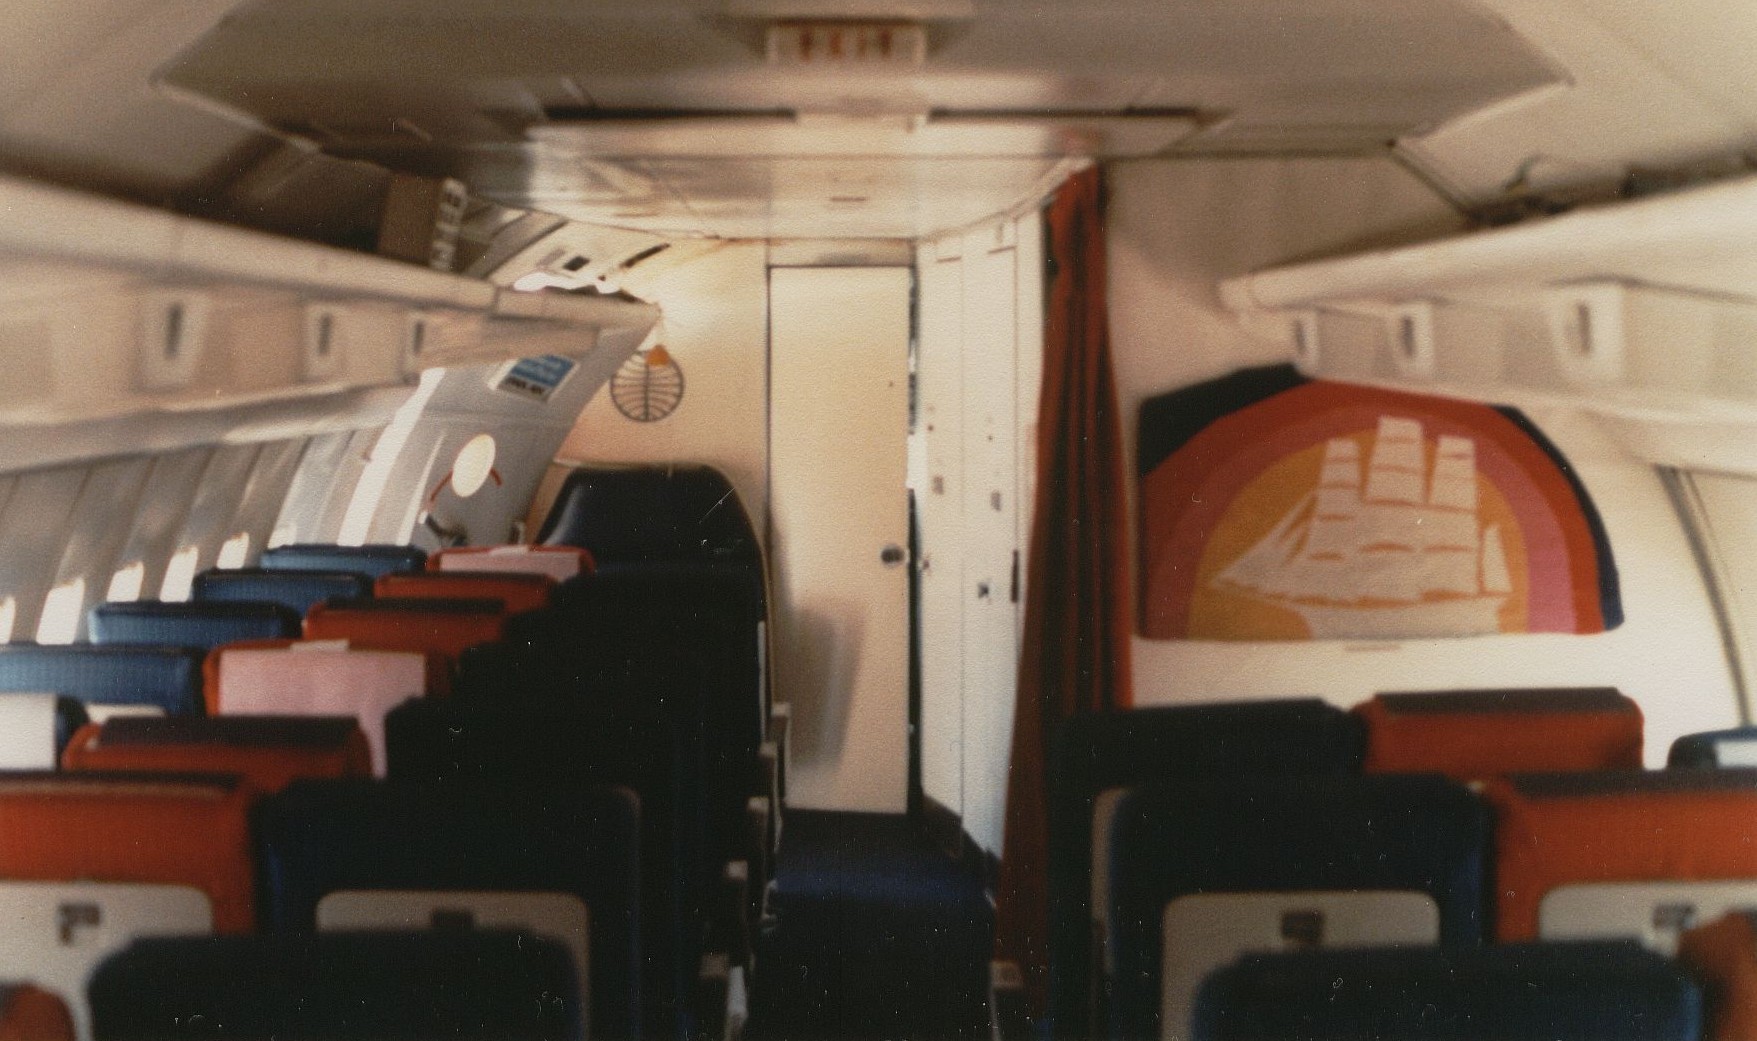 August 1981 The forward cabin of a Pan Am Boeing 707 in an all economy configuration with 180 seats.  In front of the Clipper Ship bulkhead artwork is the forward galley and two lavatories.  In the front center isthe door to the cockpit and to the left the passenger door.